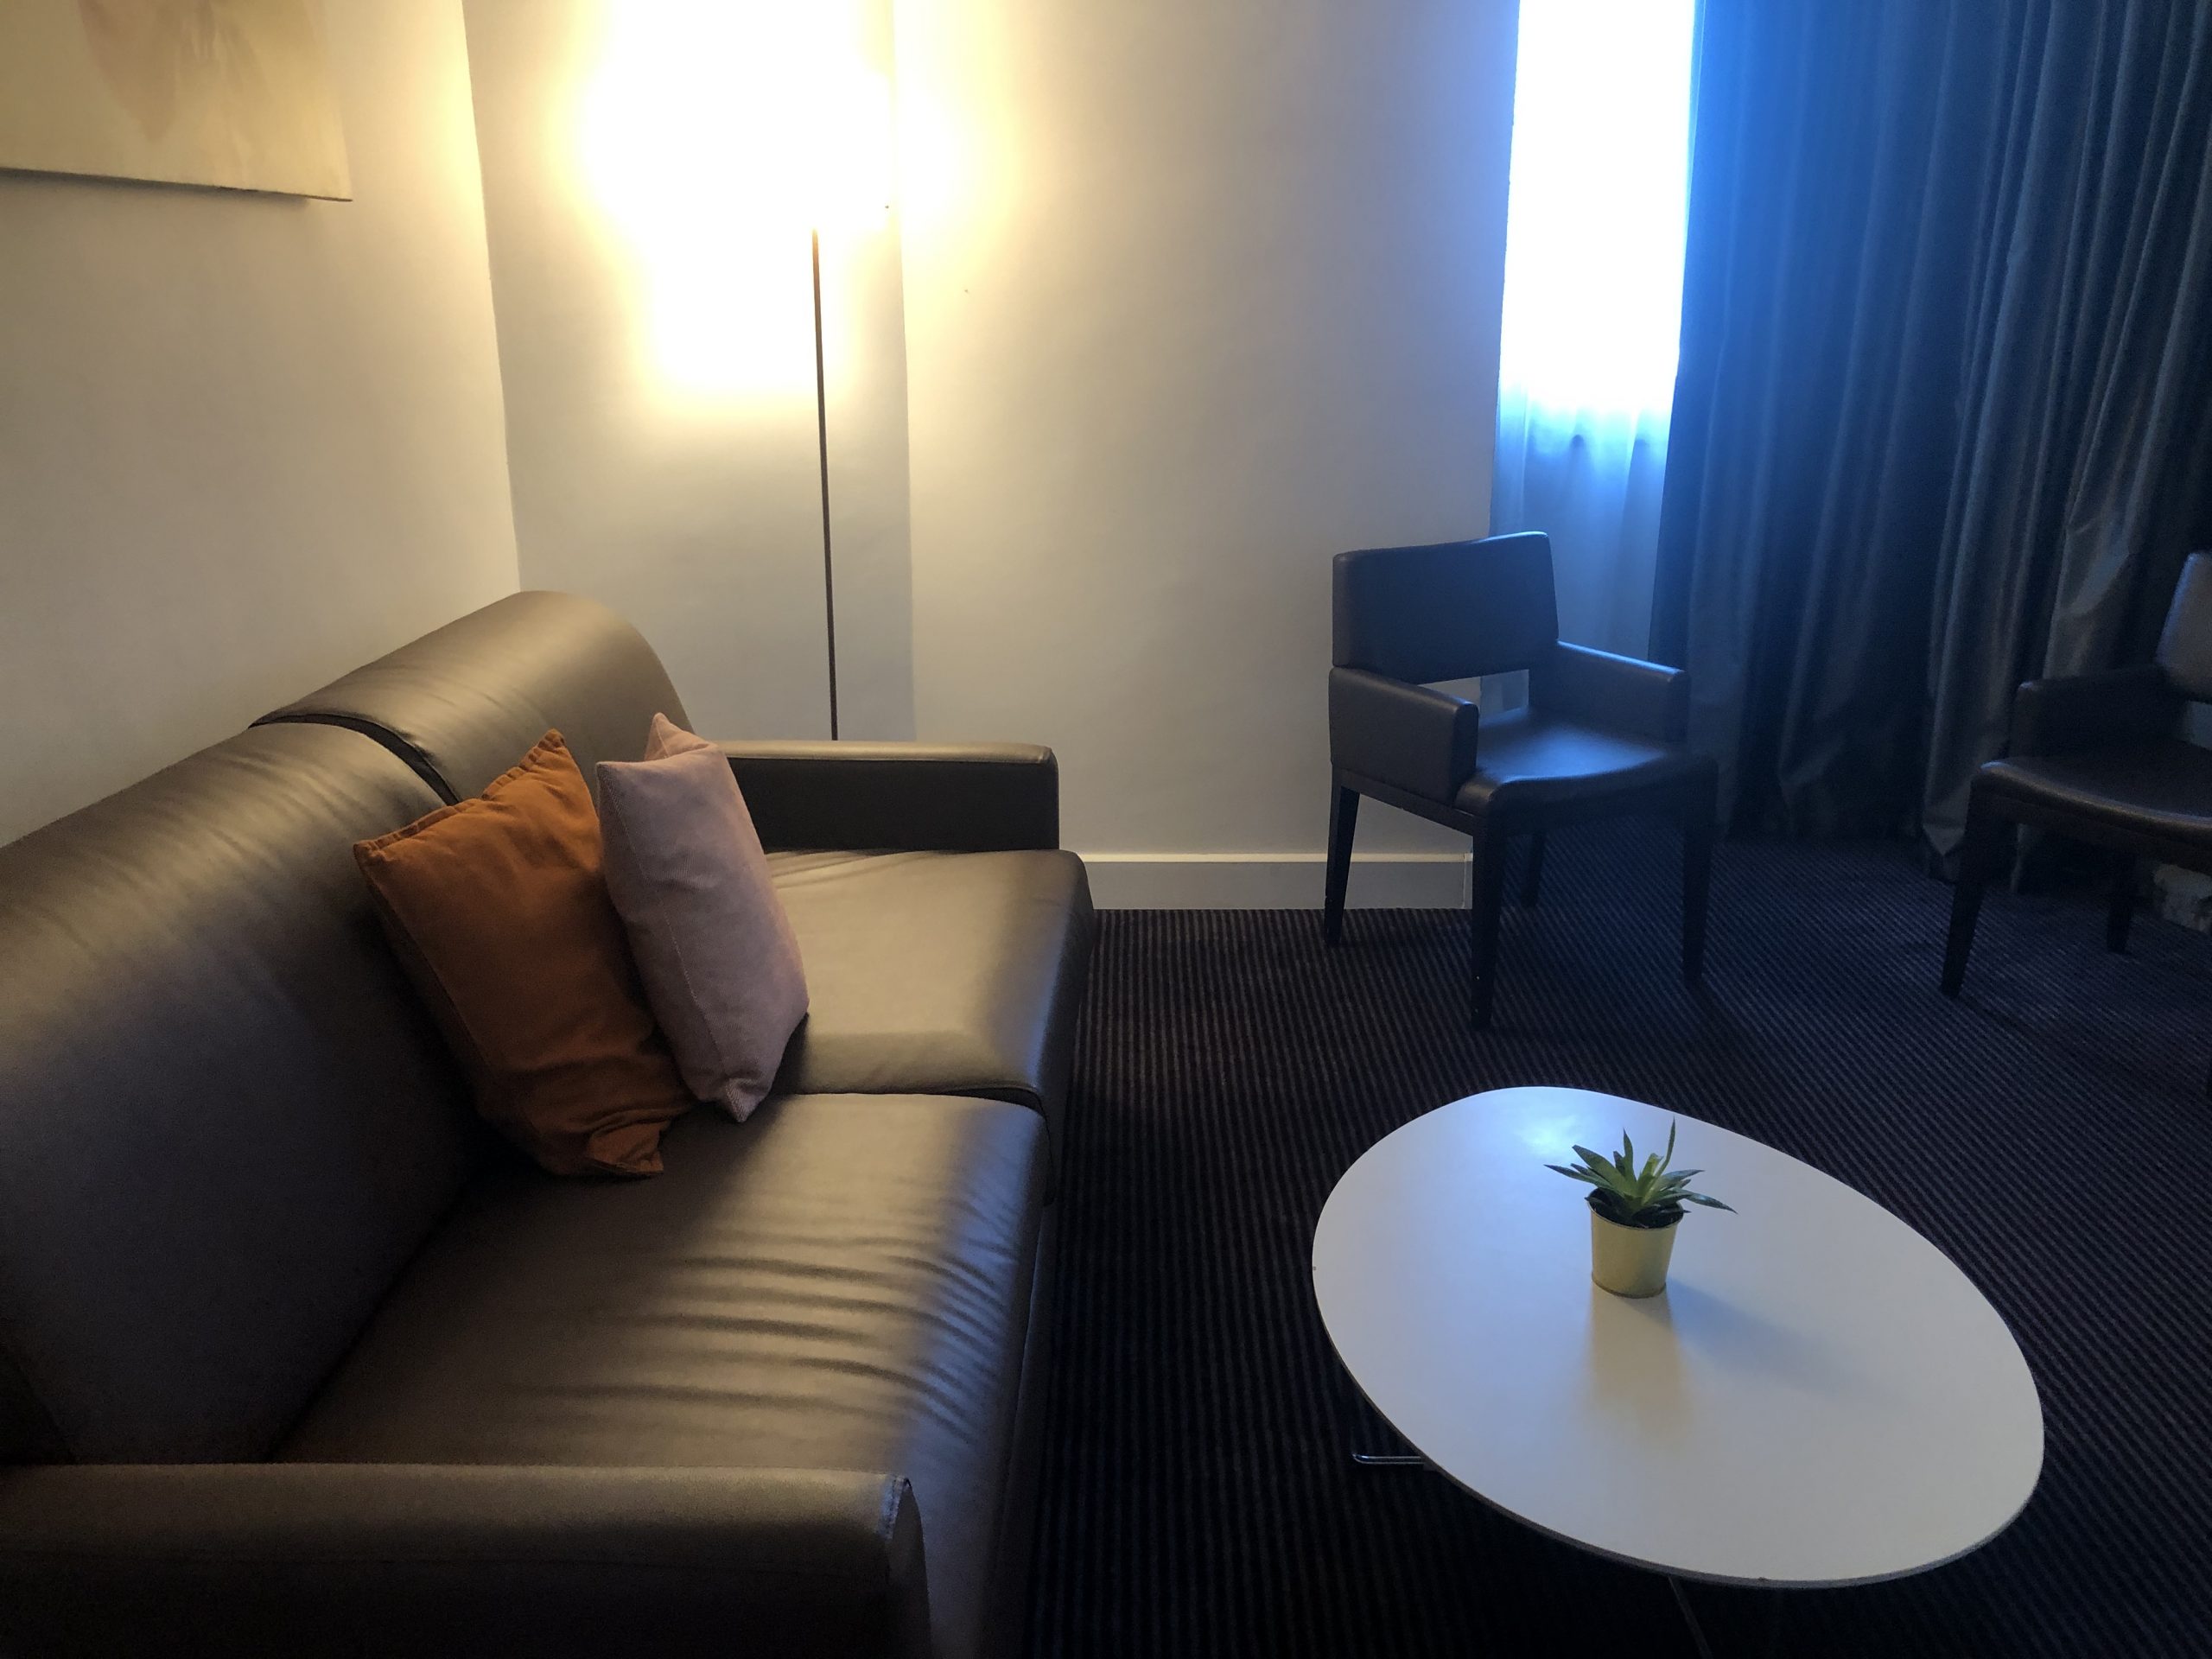 Hotel Review : メルキュール ランス サントル カテドラル スイートルーム (Mercure Reims Centre Cathédrale Hotel Suite Room)